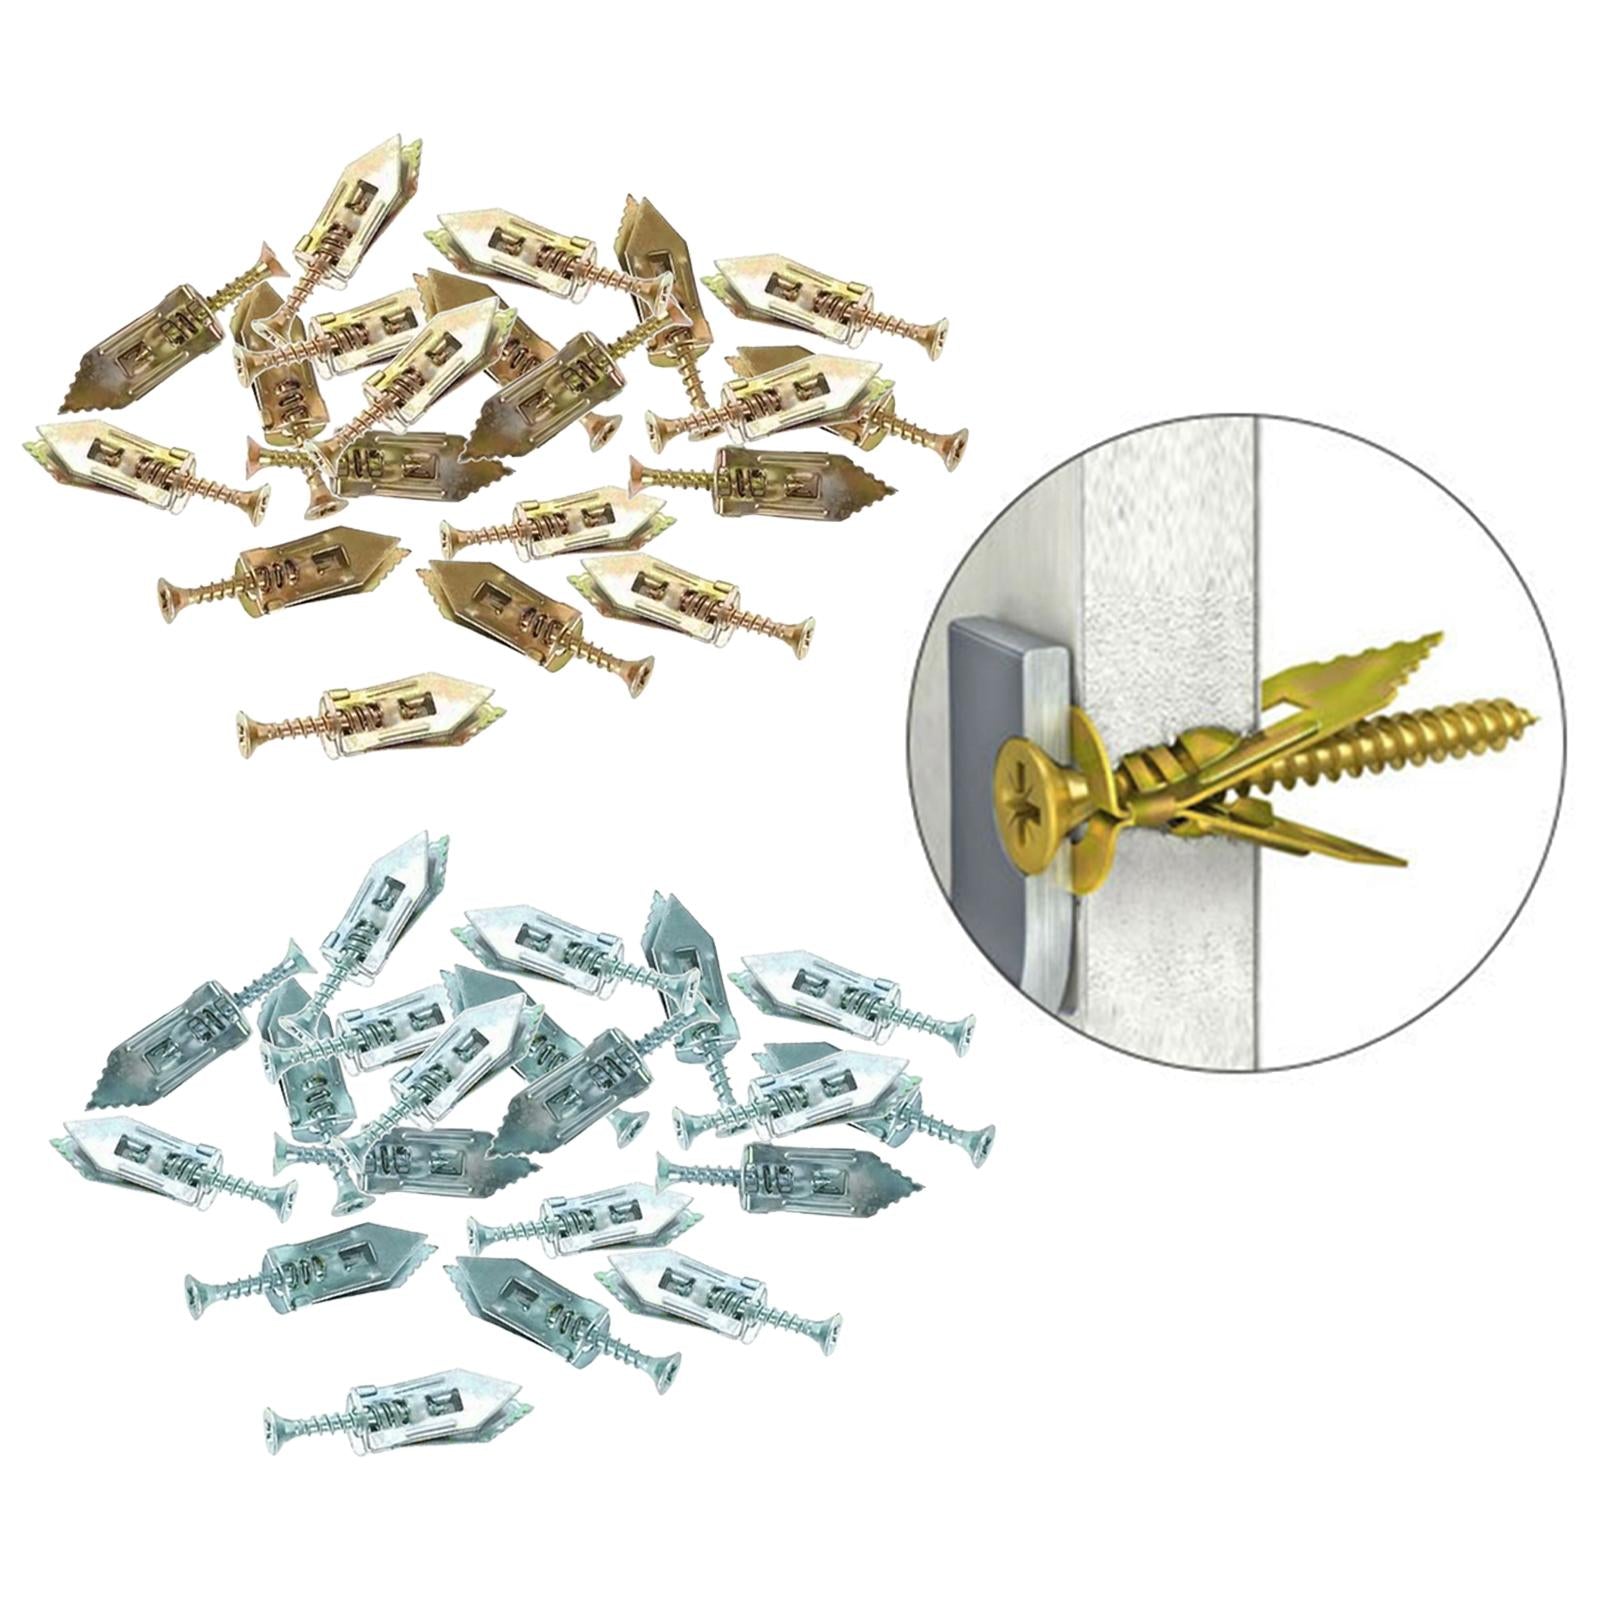 100x Drywall Self Drilling Anchors Screws Kit Easy Application for TV Bike 12x30mm Colorful